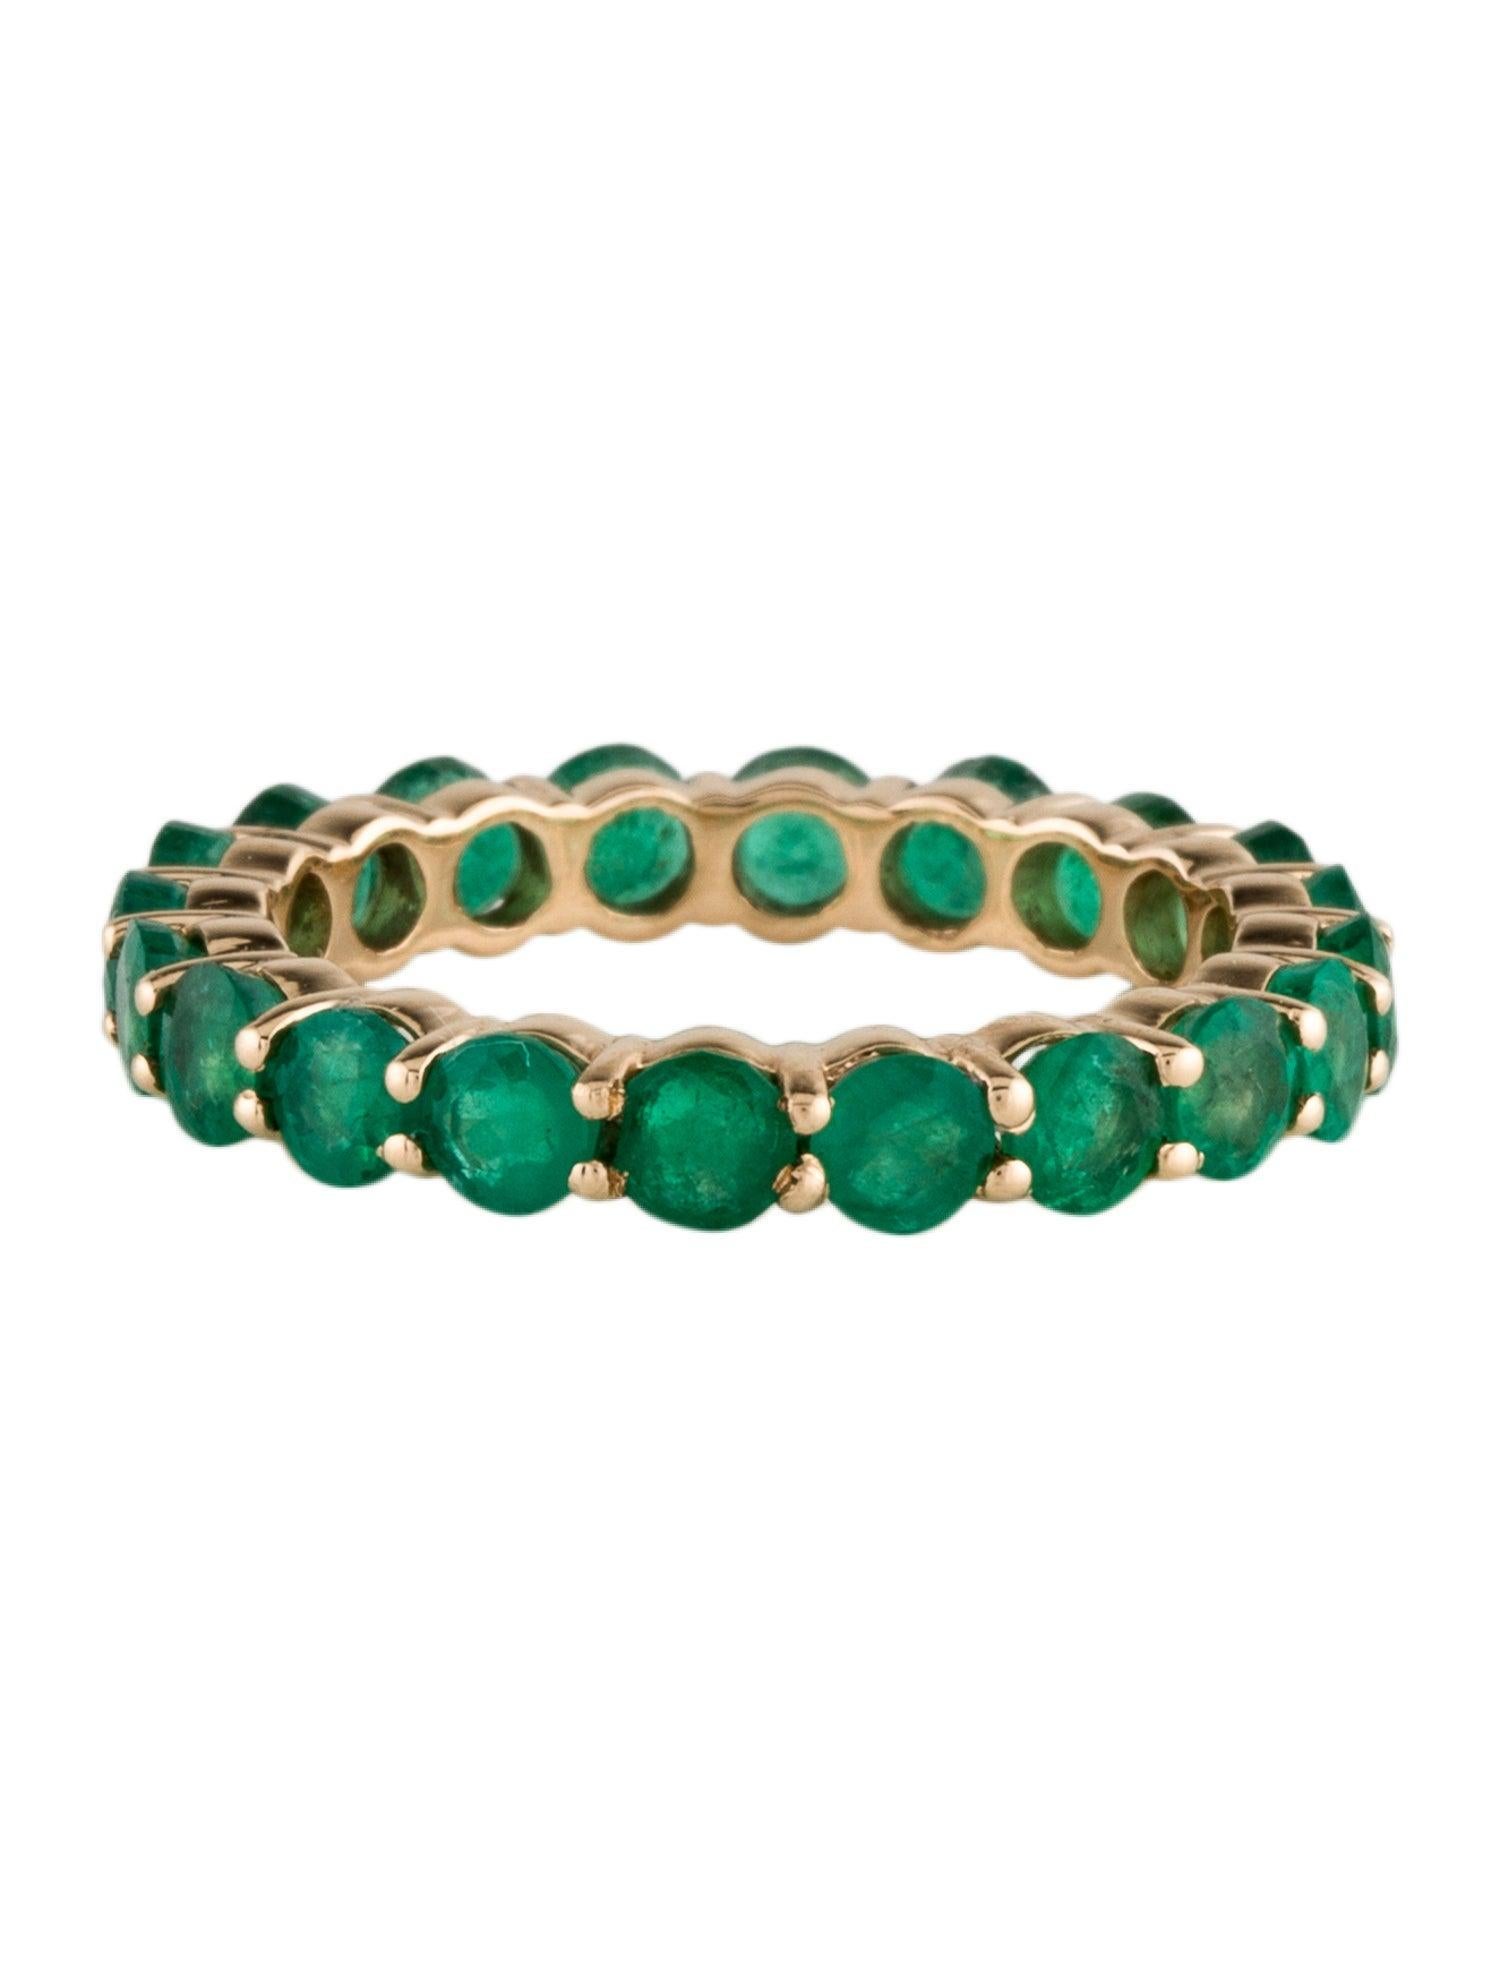 Brilliant Cut Luxe 14K Emerald Eternity Band - 2.02ctw - Timeless Green Beauty